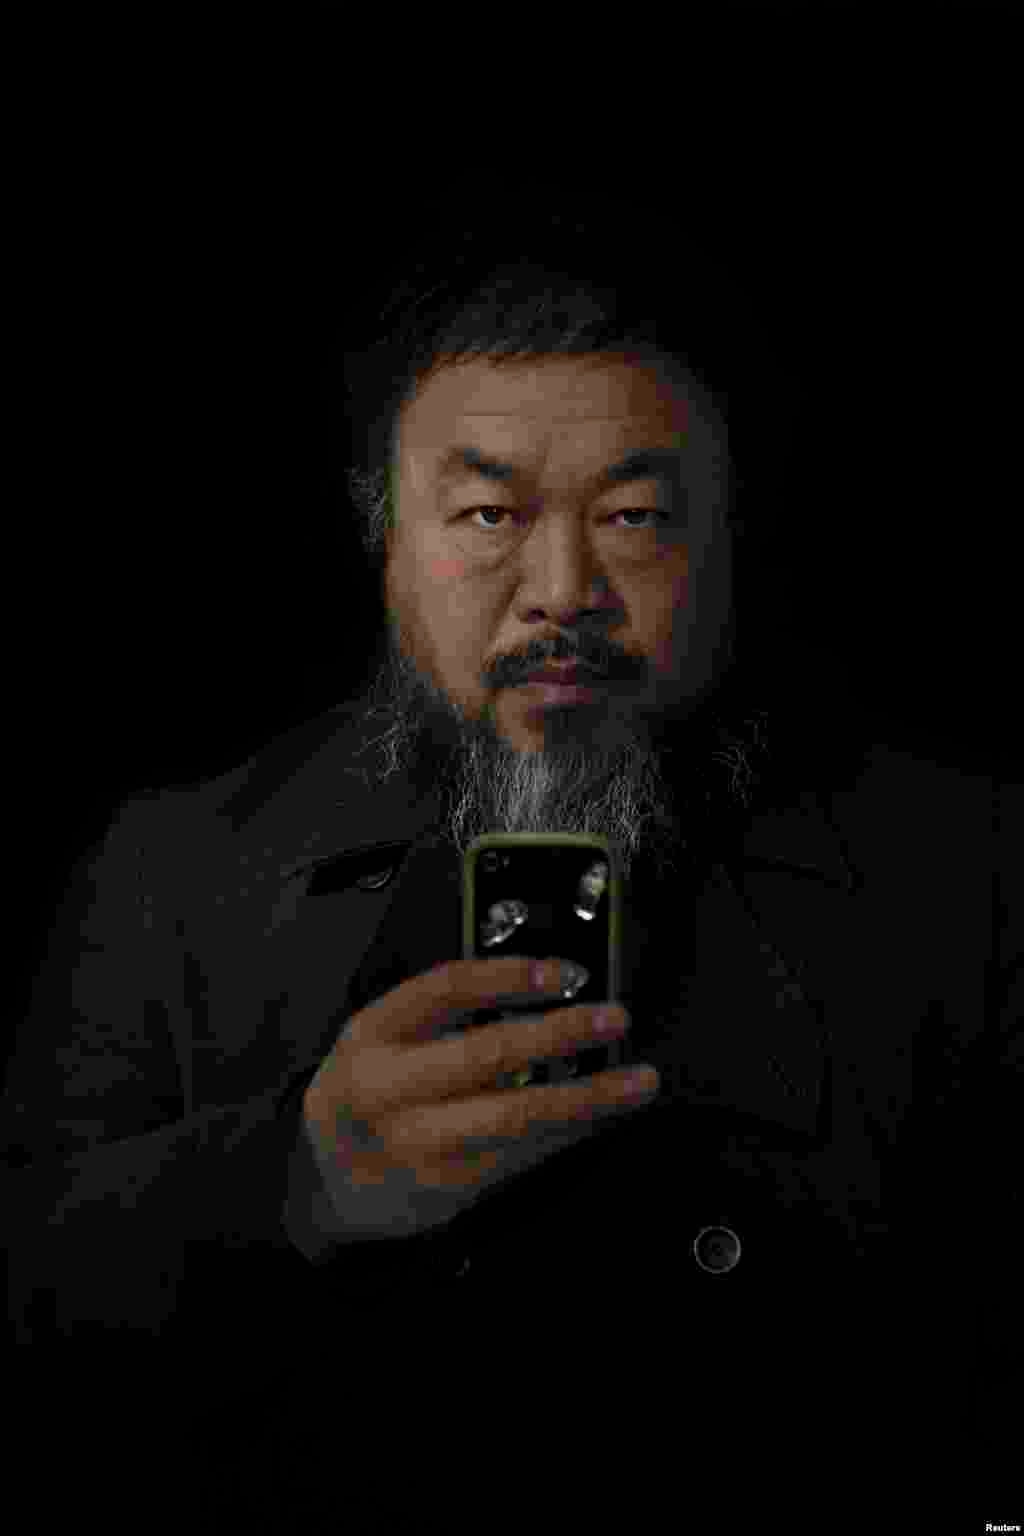 Stefen Chow of Malaysia, a photographer working for &quot;Smithsonian&quot; magazine, won second prize in the People -- Staged Portraits Single category with this picture of Chinese dissident artist Ai Weiwei in Beijing.